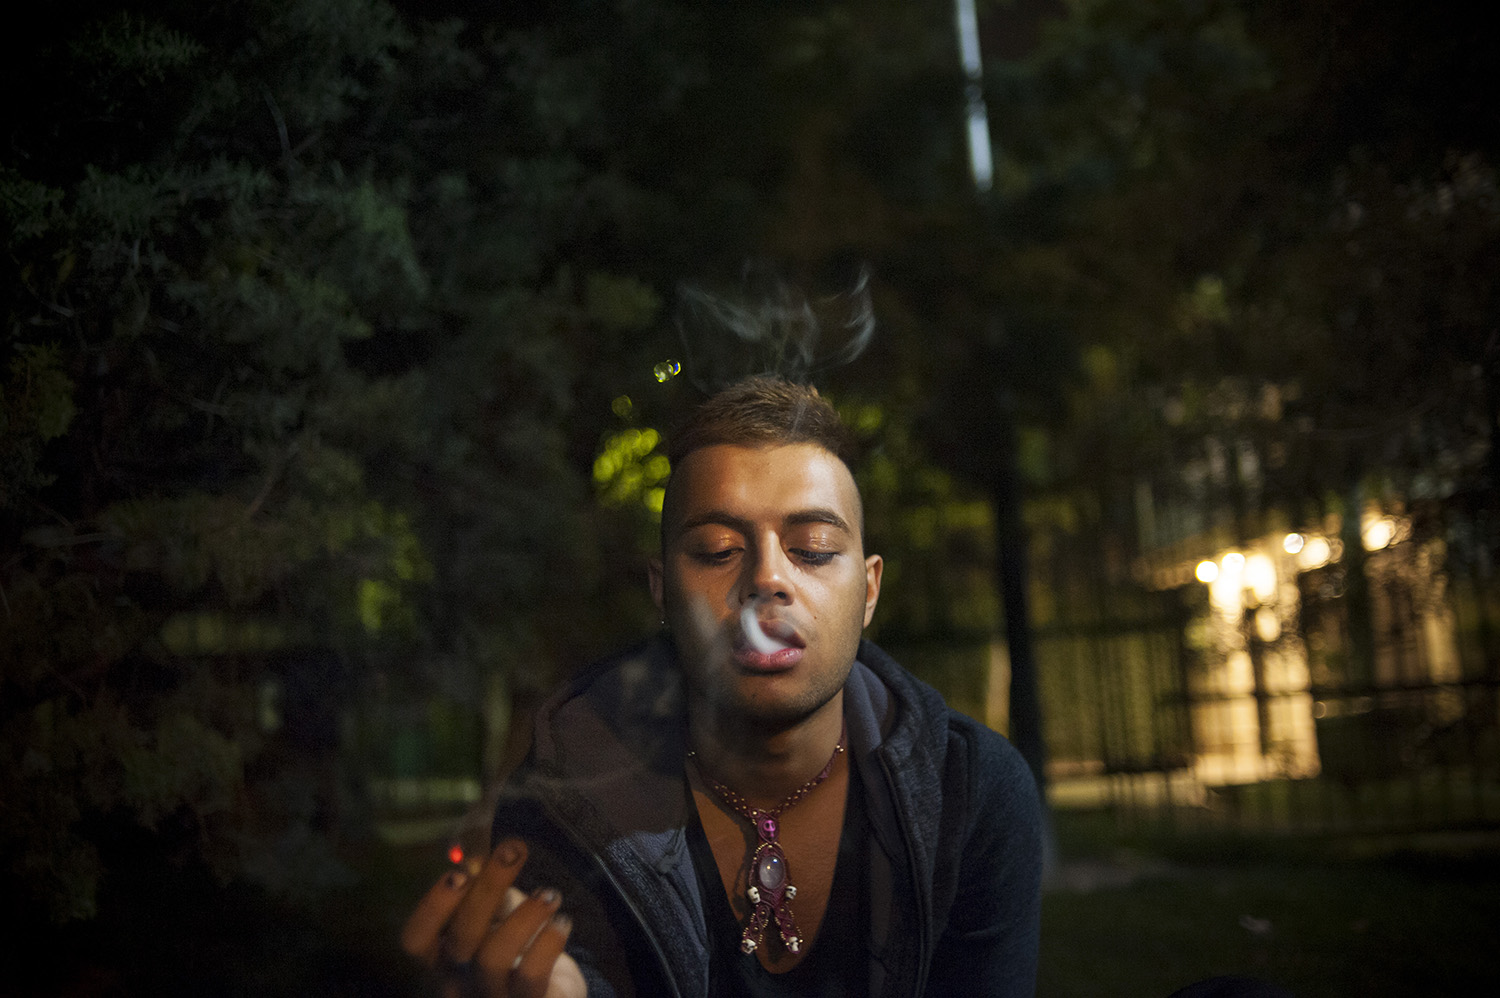 Only a few nights to his departure, Amir hangs out with his friend in a park late at night and smokes a joint to relax. Tehran, Iran.